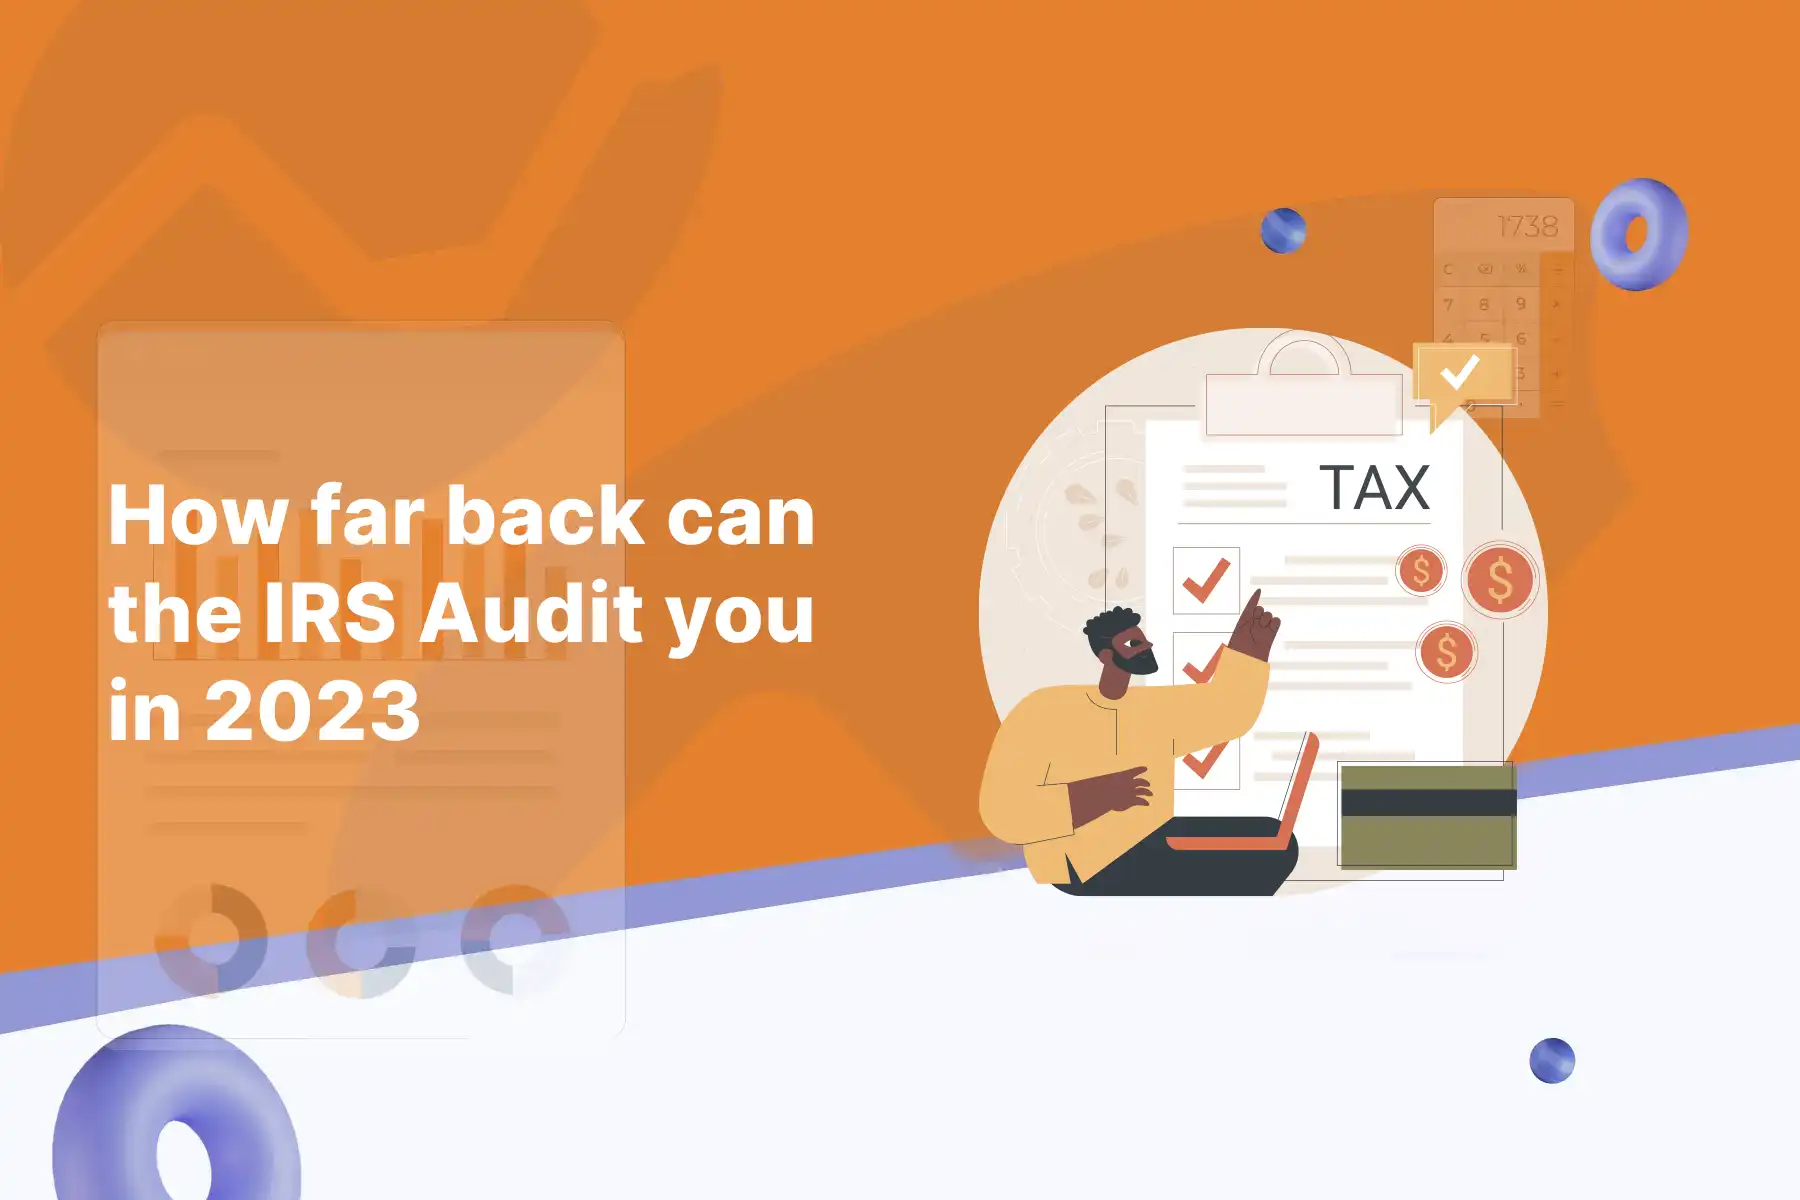 How far back can the IRS Audit you